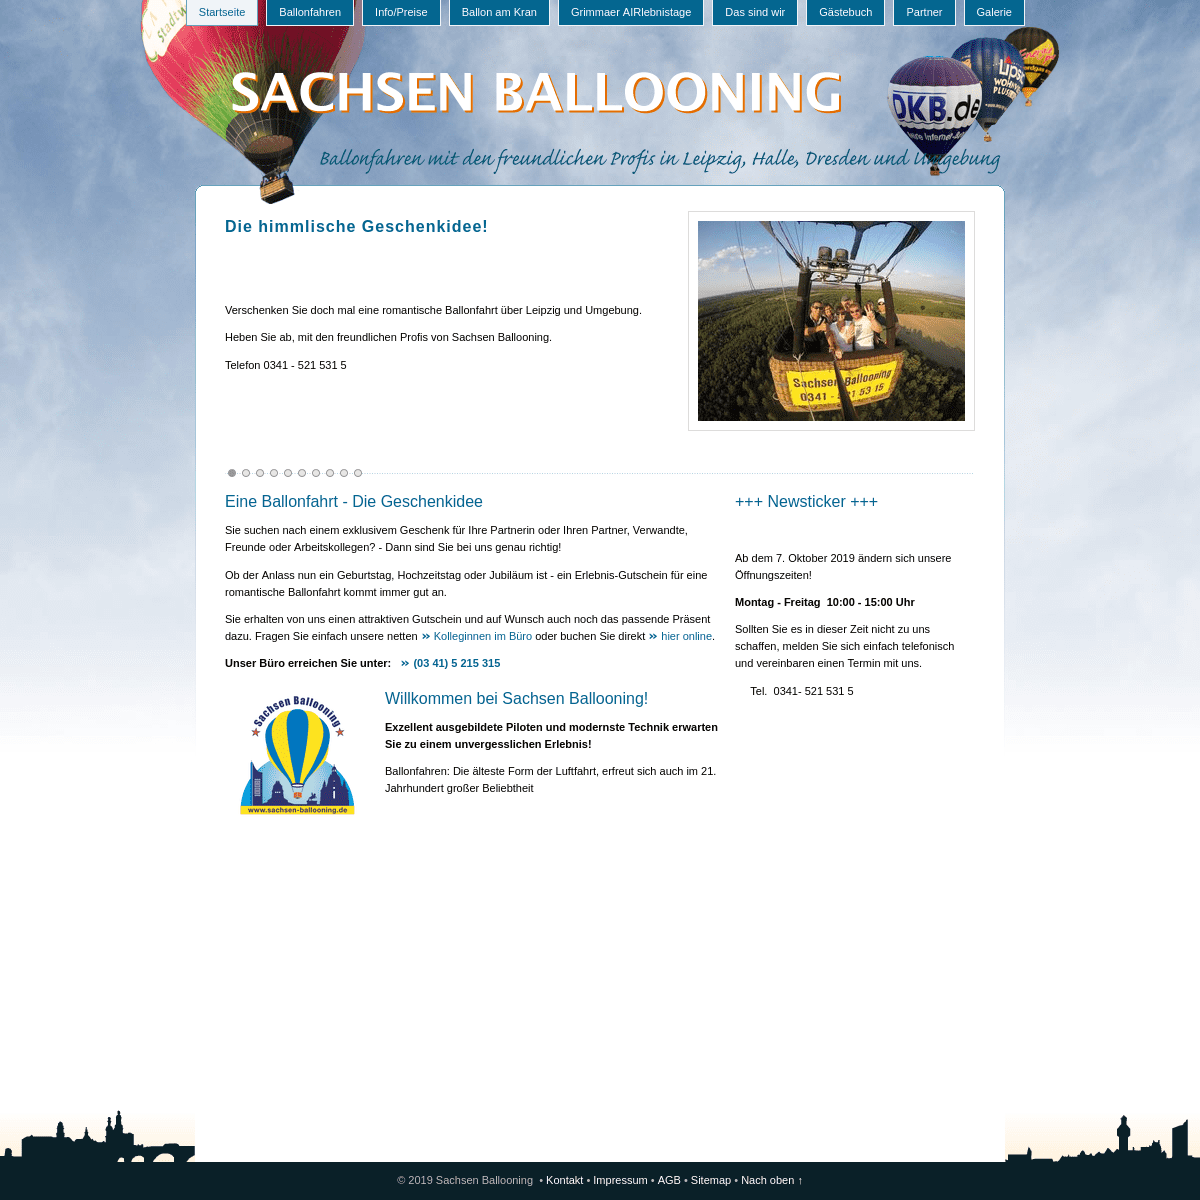 A complete backup of sachsen-ballooning.de